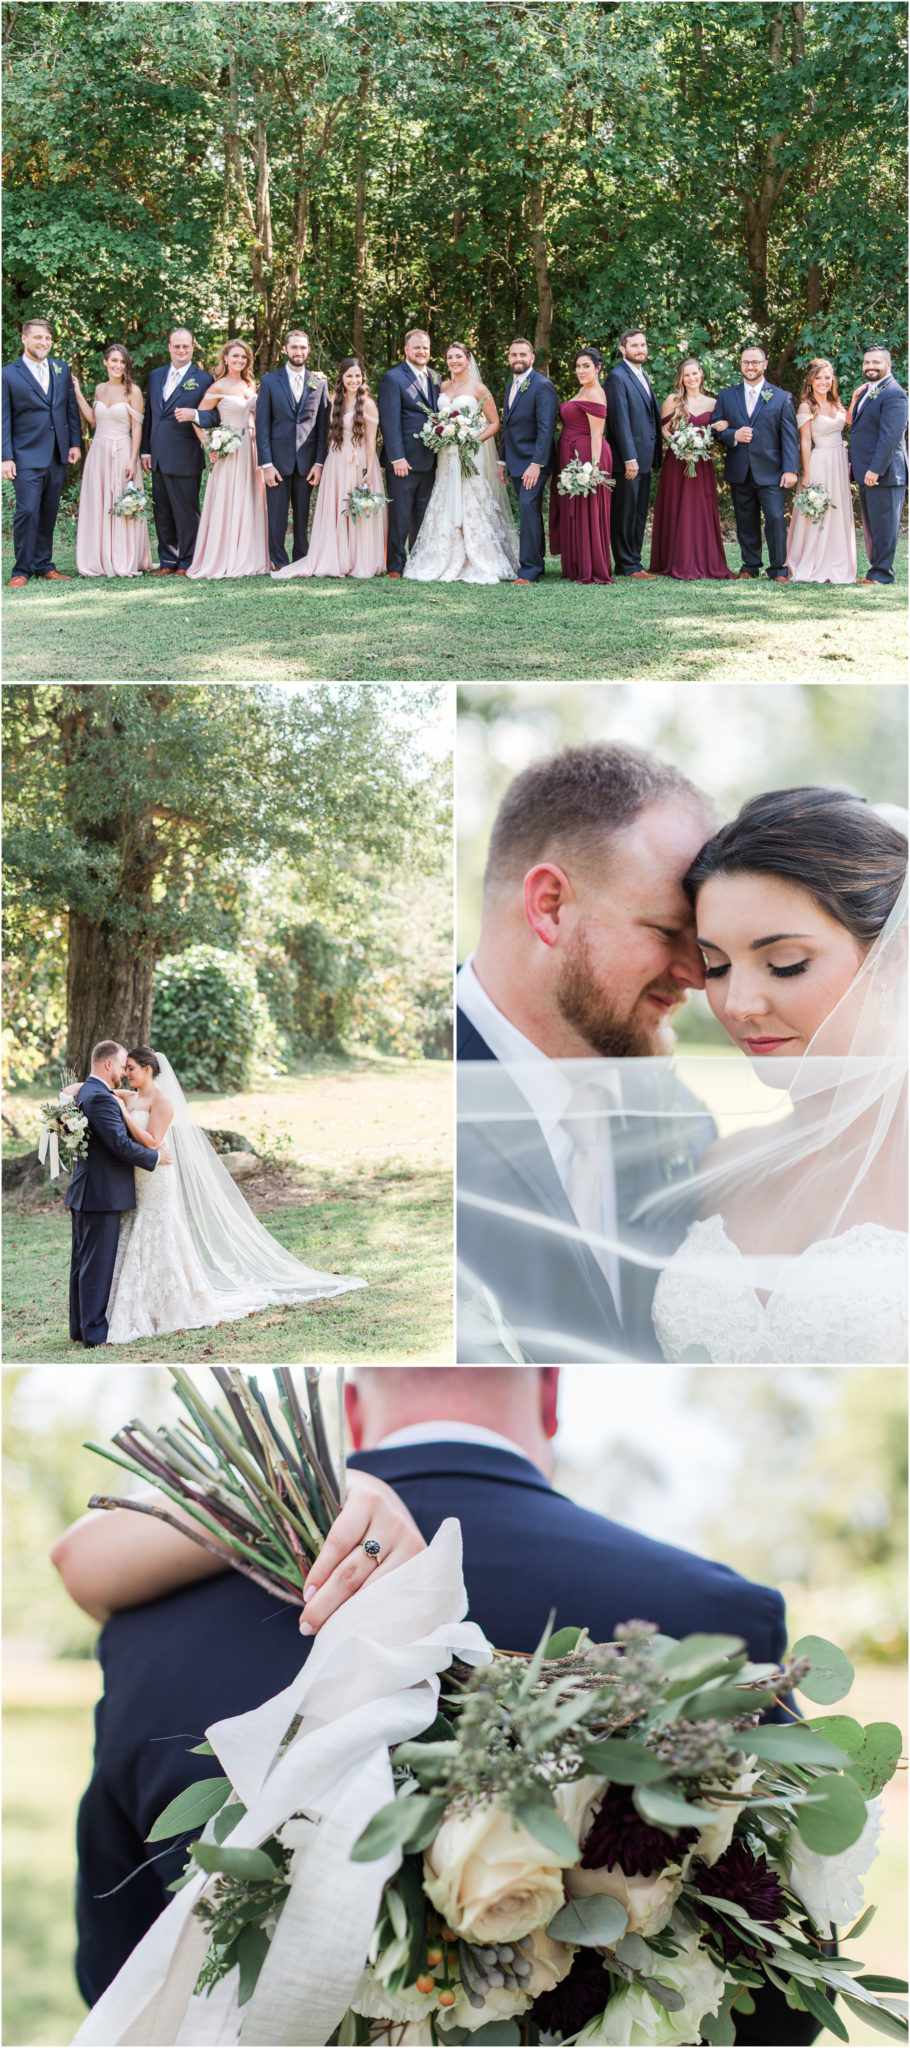 A Vineyard Wedding at Cityscape Winery in Pelter, SC Bride & Groom Photos